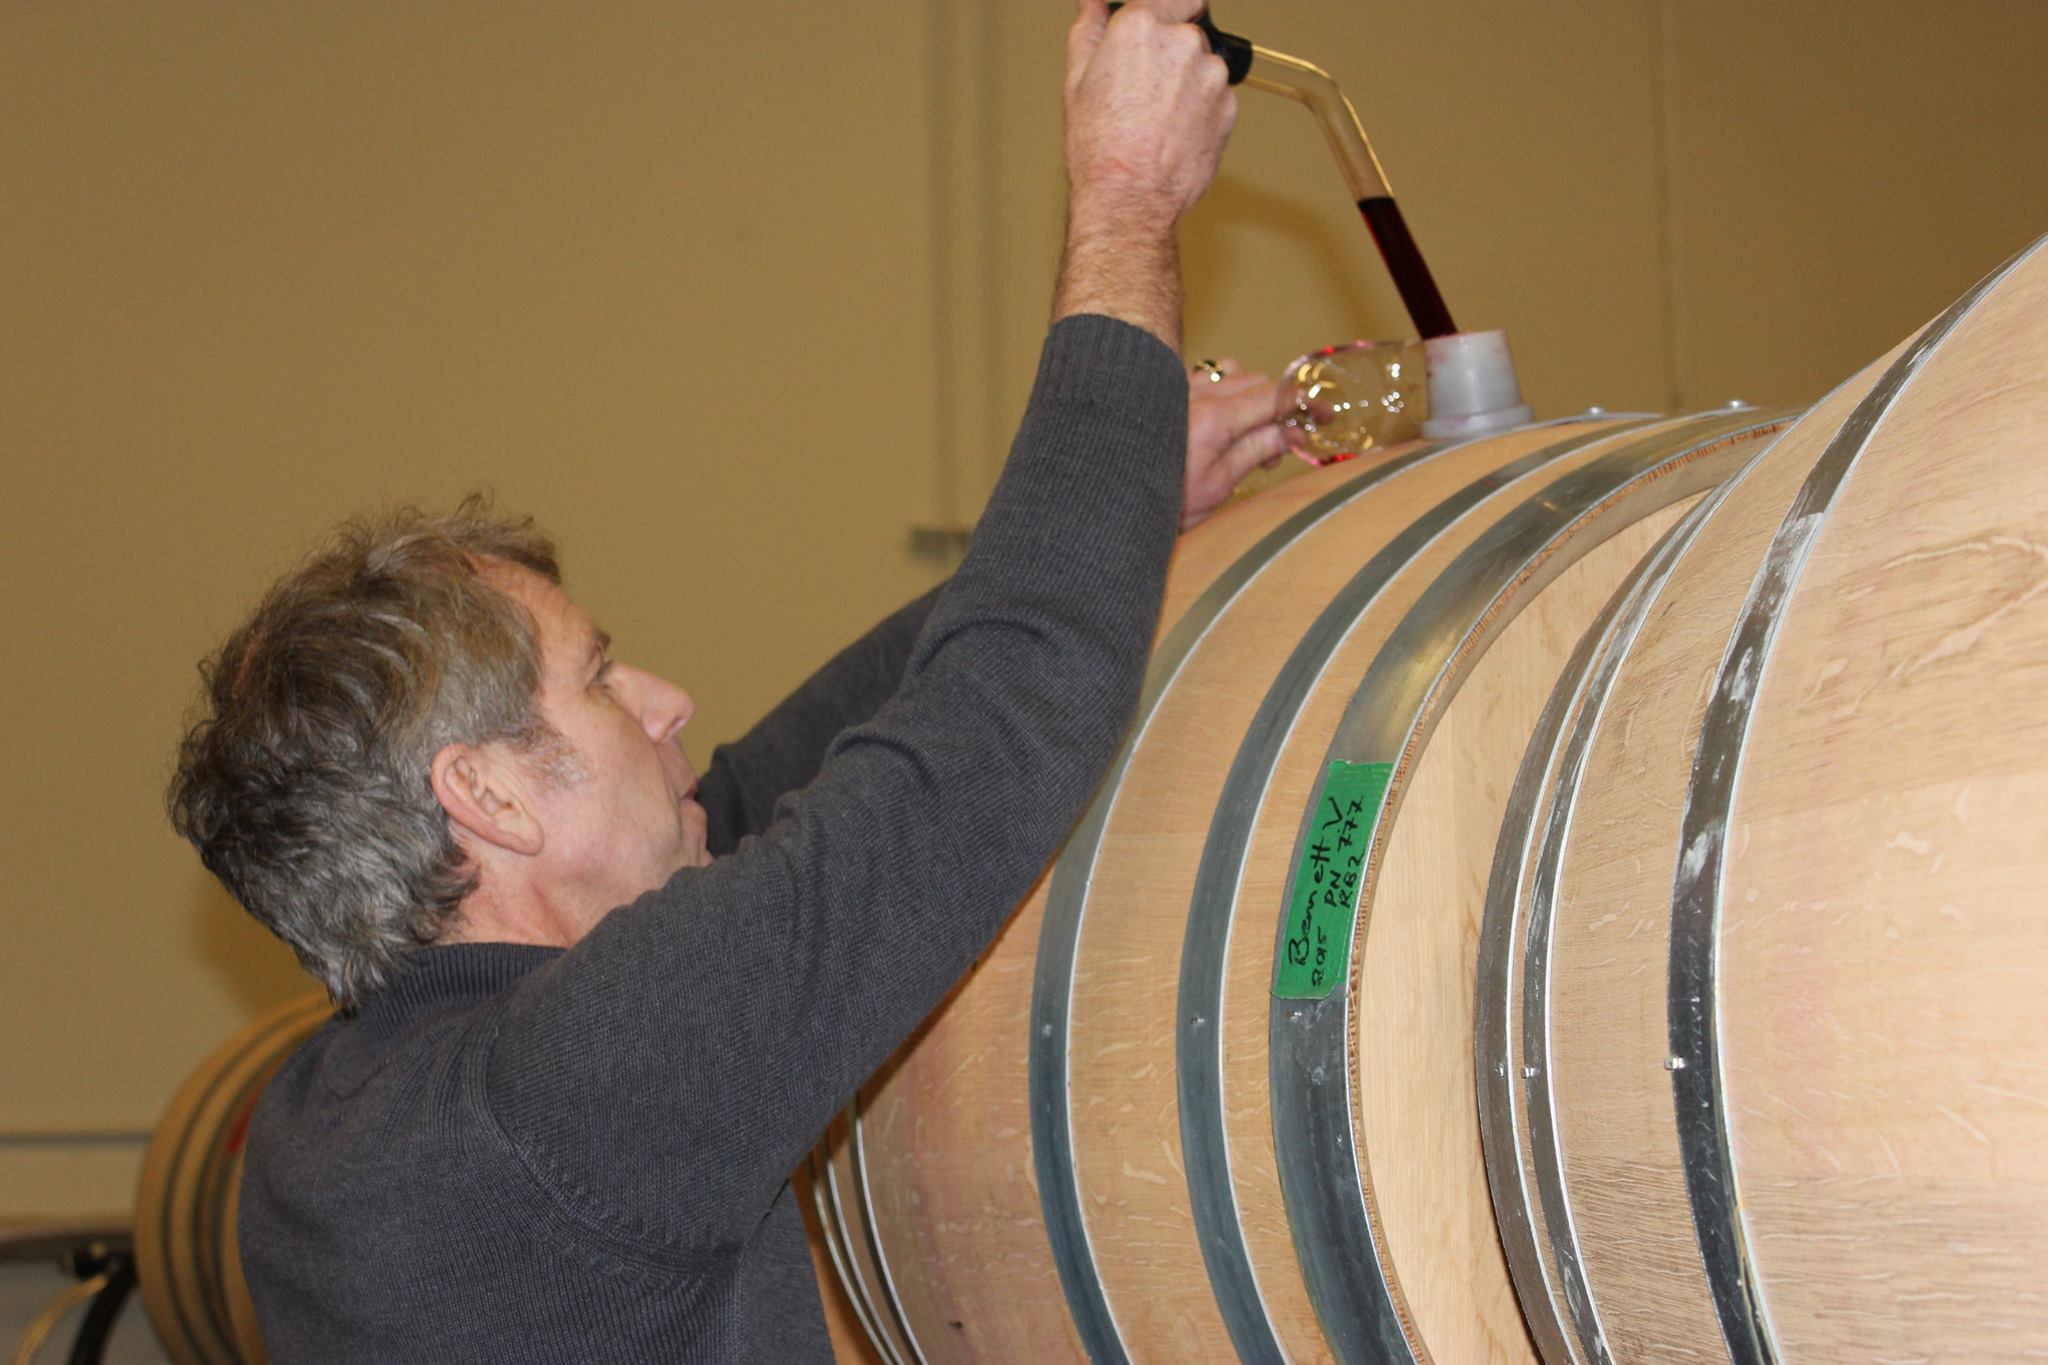  Our Pinot Noirs are aged in carefully selected French oak barrels 